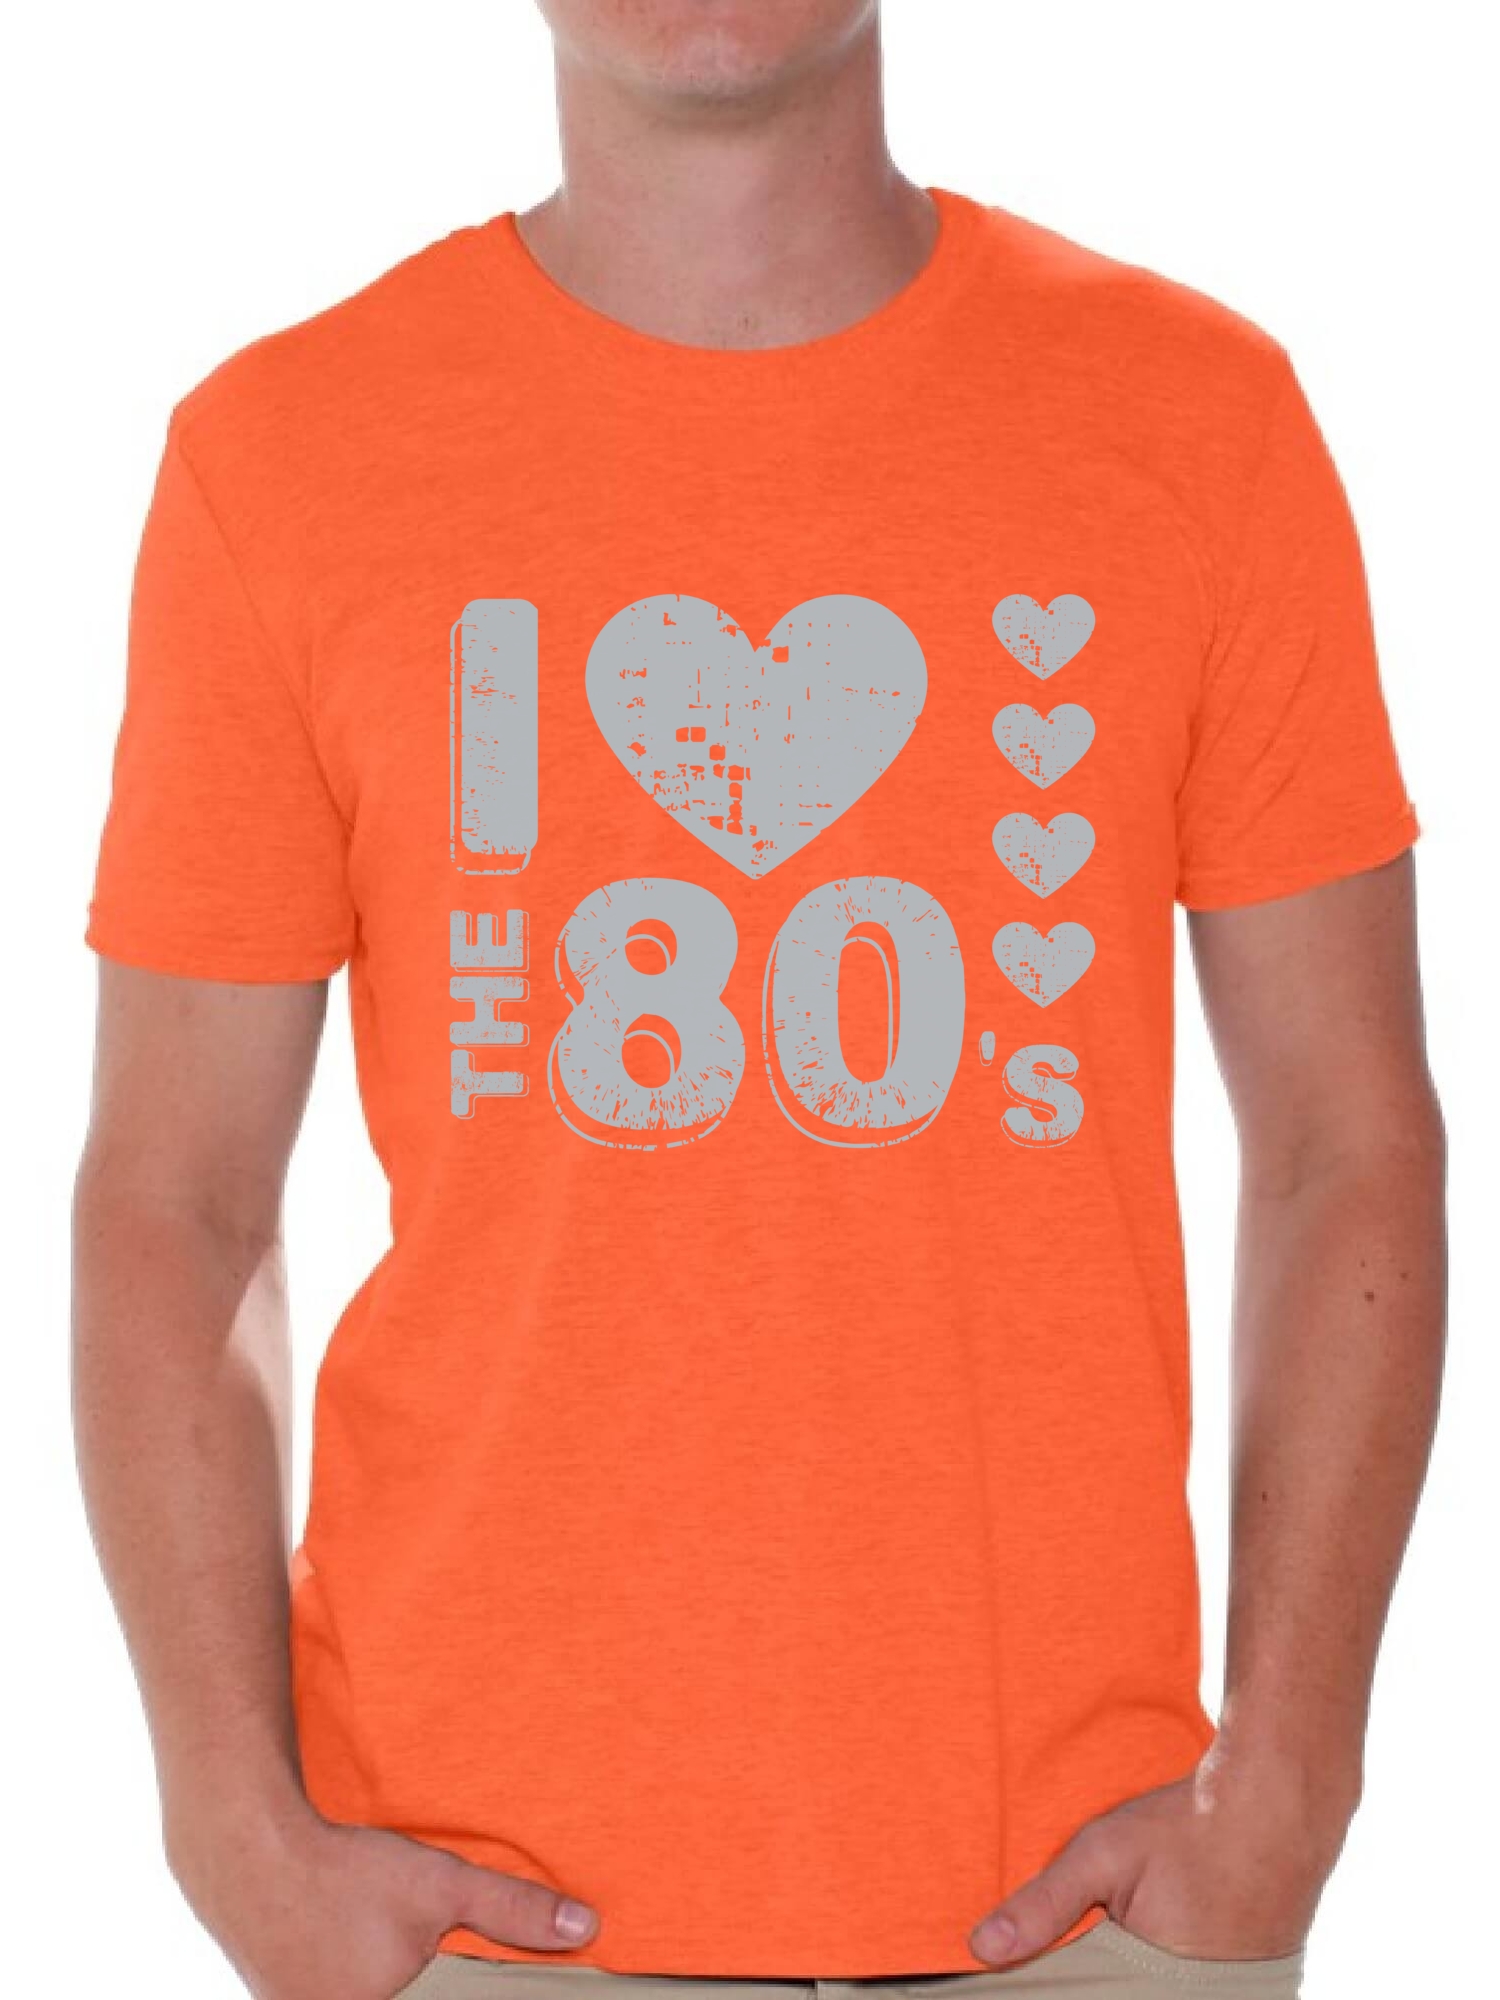 Awkward Styles I Love the 80s Shirt 80s T Shirt for Men's 80s Costumes 80s Outfit for 80s Party Retro Gray 80s Accessories 80s Rock T Shirt 80s T Shirt Vintage Rock Concert T-Shirt - image 1 of 4